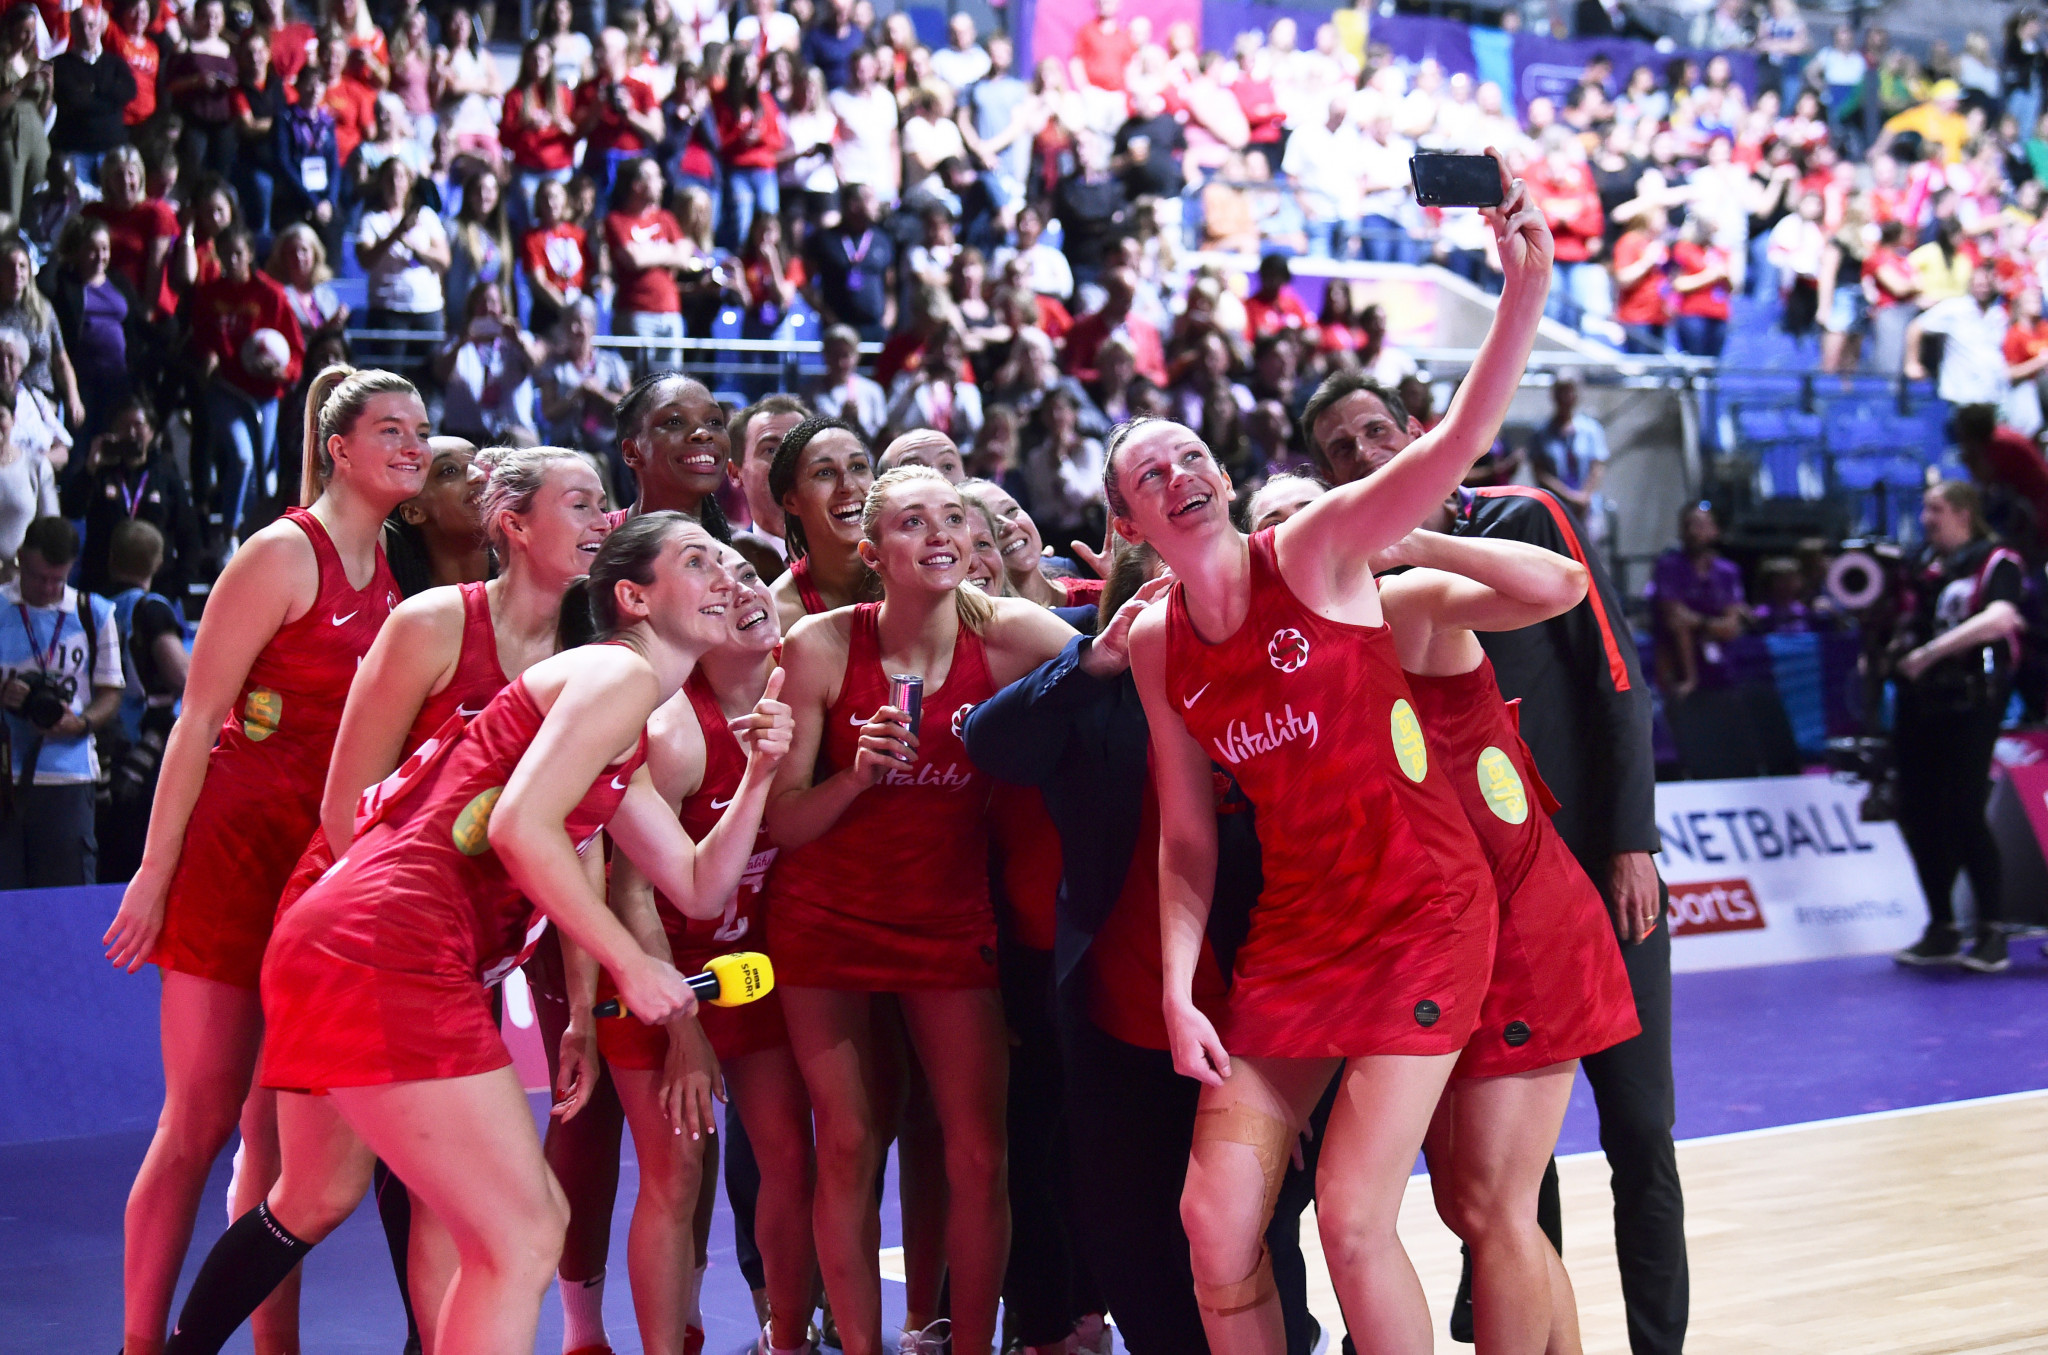 England's netball team secured bronze at the 2019 World Cup in Liverpool ©Getty Images